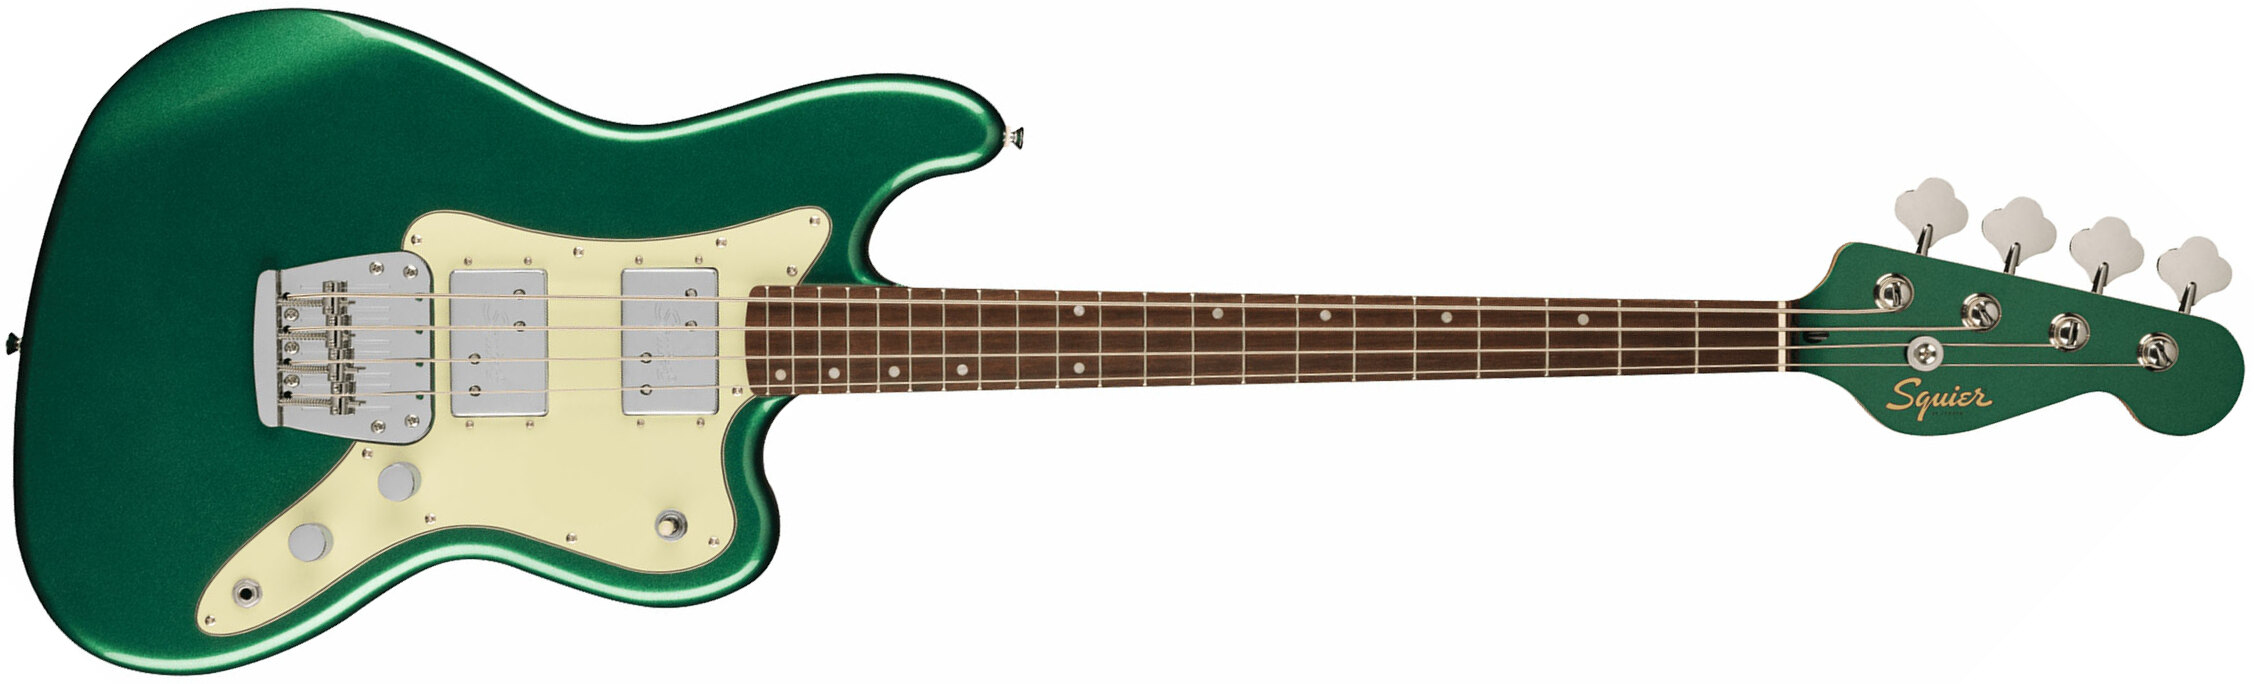 Squier Rascal Bass Hh Paranormal 2h Lau - Sherwood Green - Solid body electric bass - Main picture